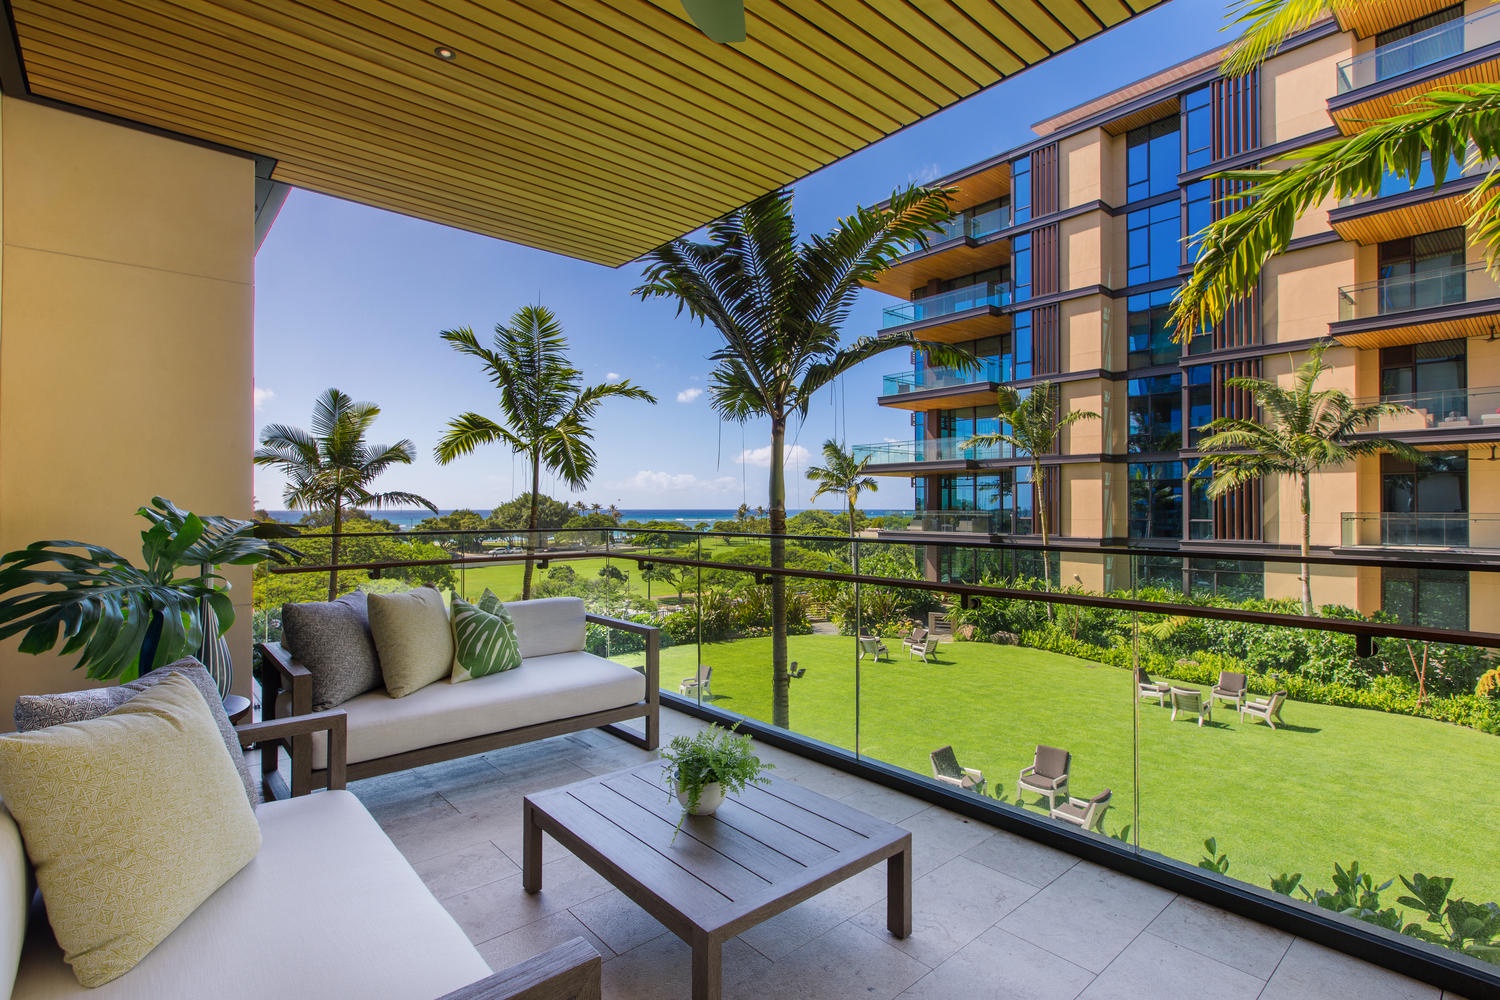 Honolulu Vacation Rentals, Park Lane Palm Resort - Relax on your Private Lanai overlooking the Great Lawn